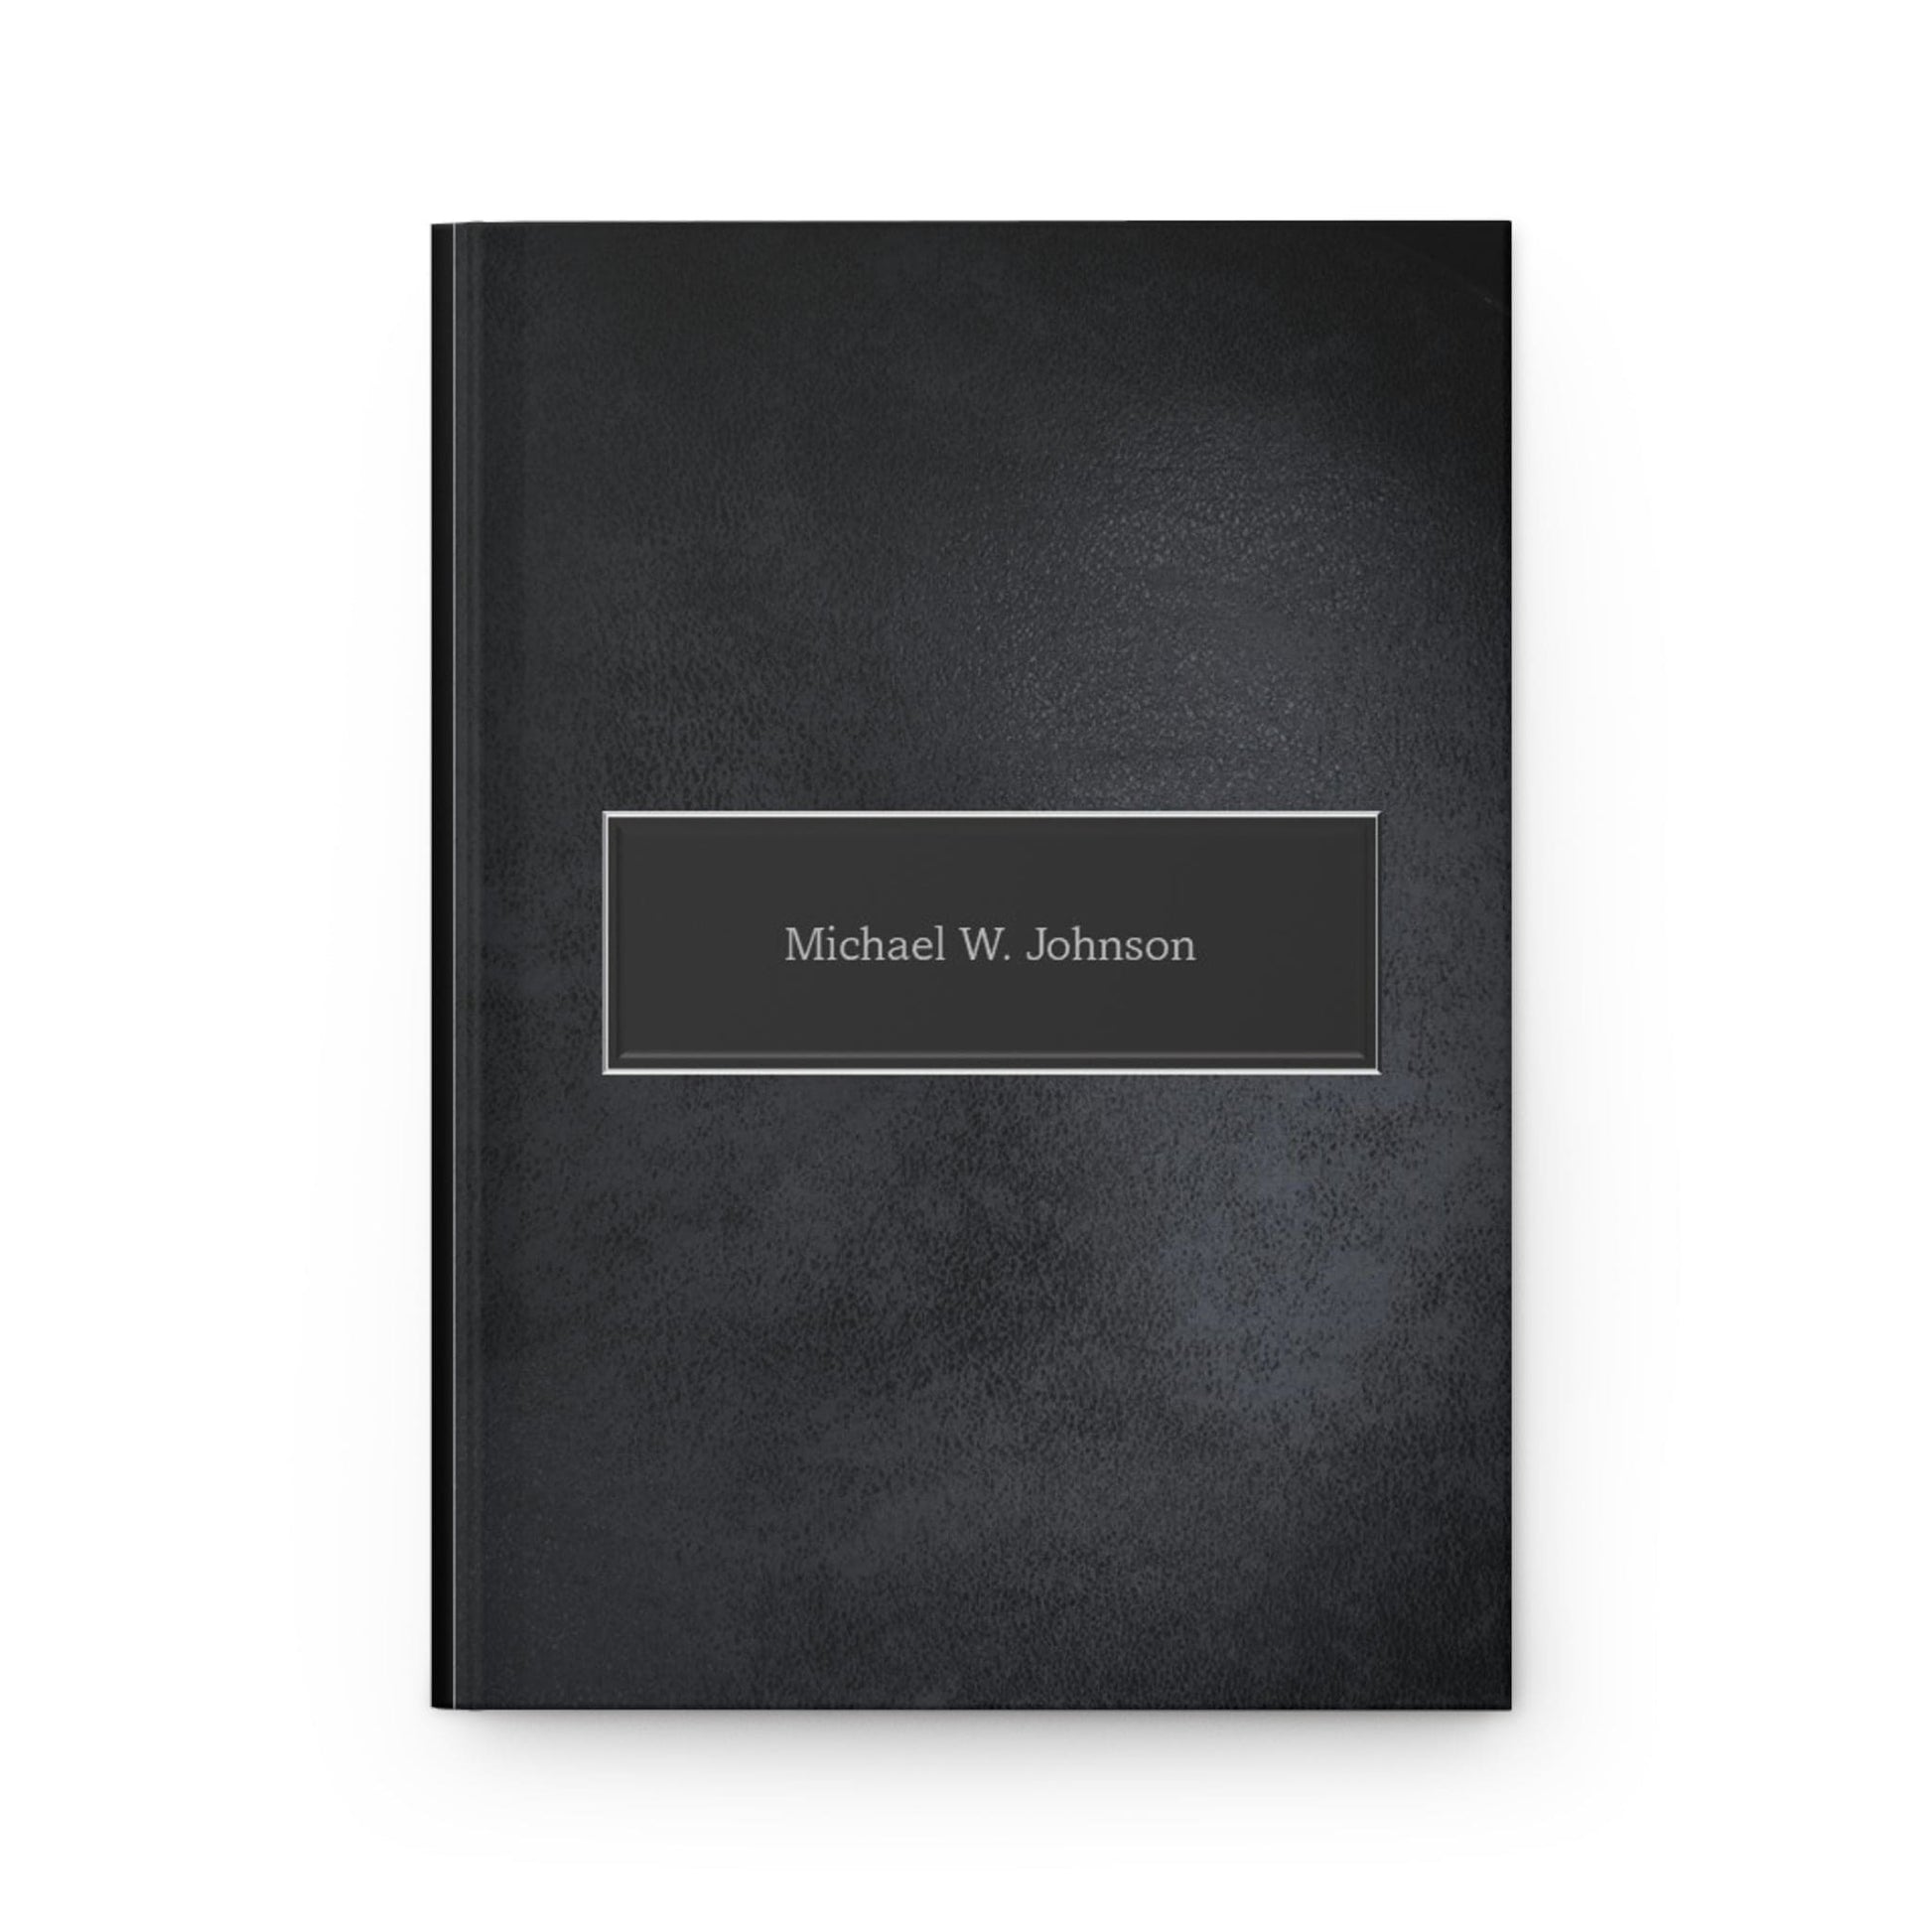 "Personalized Journal for Men: Capture Memories and Express Yourself with customized Journal for men. The Gentleman Black Journal